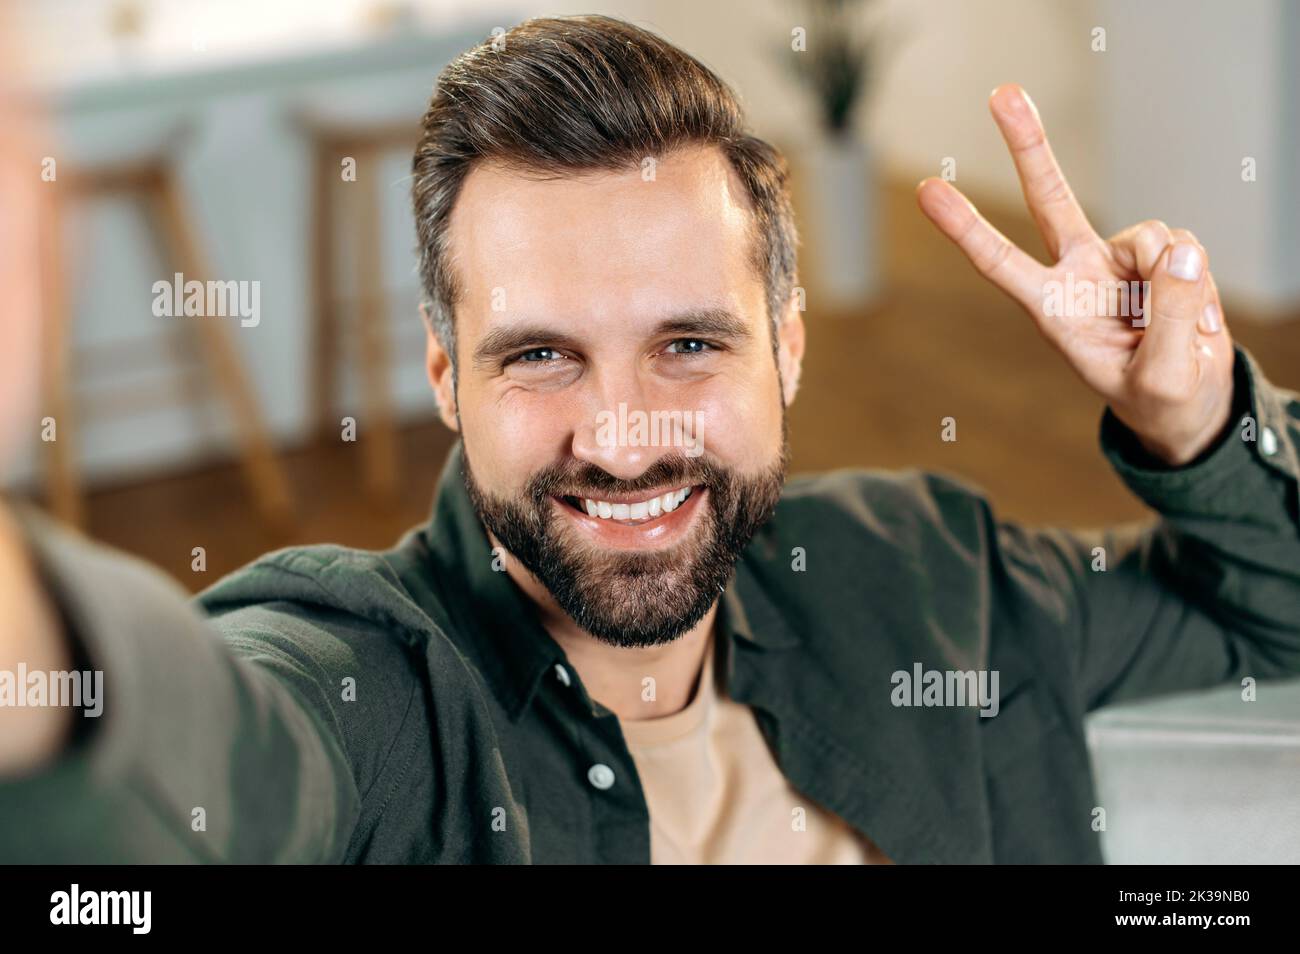 Joyful handsome positive caucasian bearded man, in a casual shirt, takes a selfie on his smartphone, shows a peace sign with fingers, looks into the front camera of the phone, smiles friendly Stock Photo